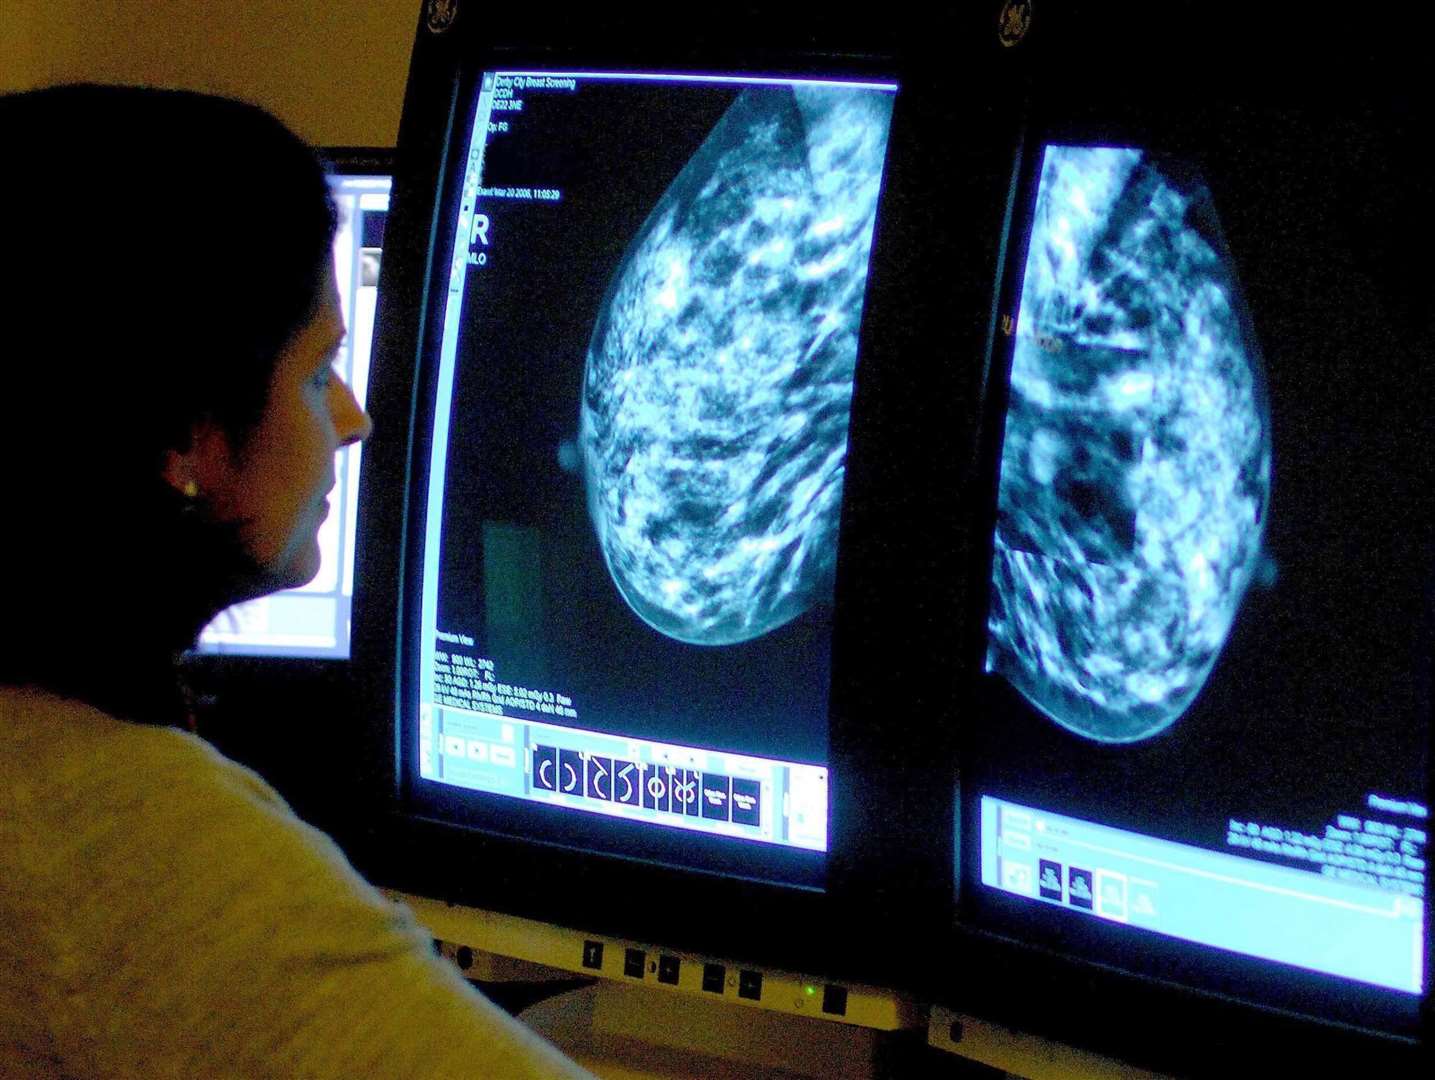 Breast Cancer Now says breast cancer screening services have been hugely affected by the pandemic